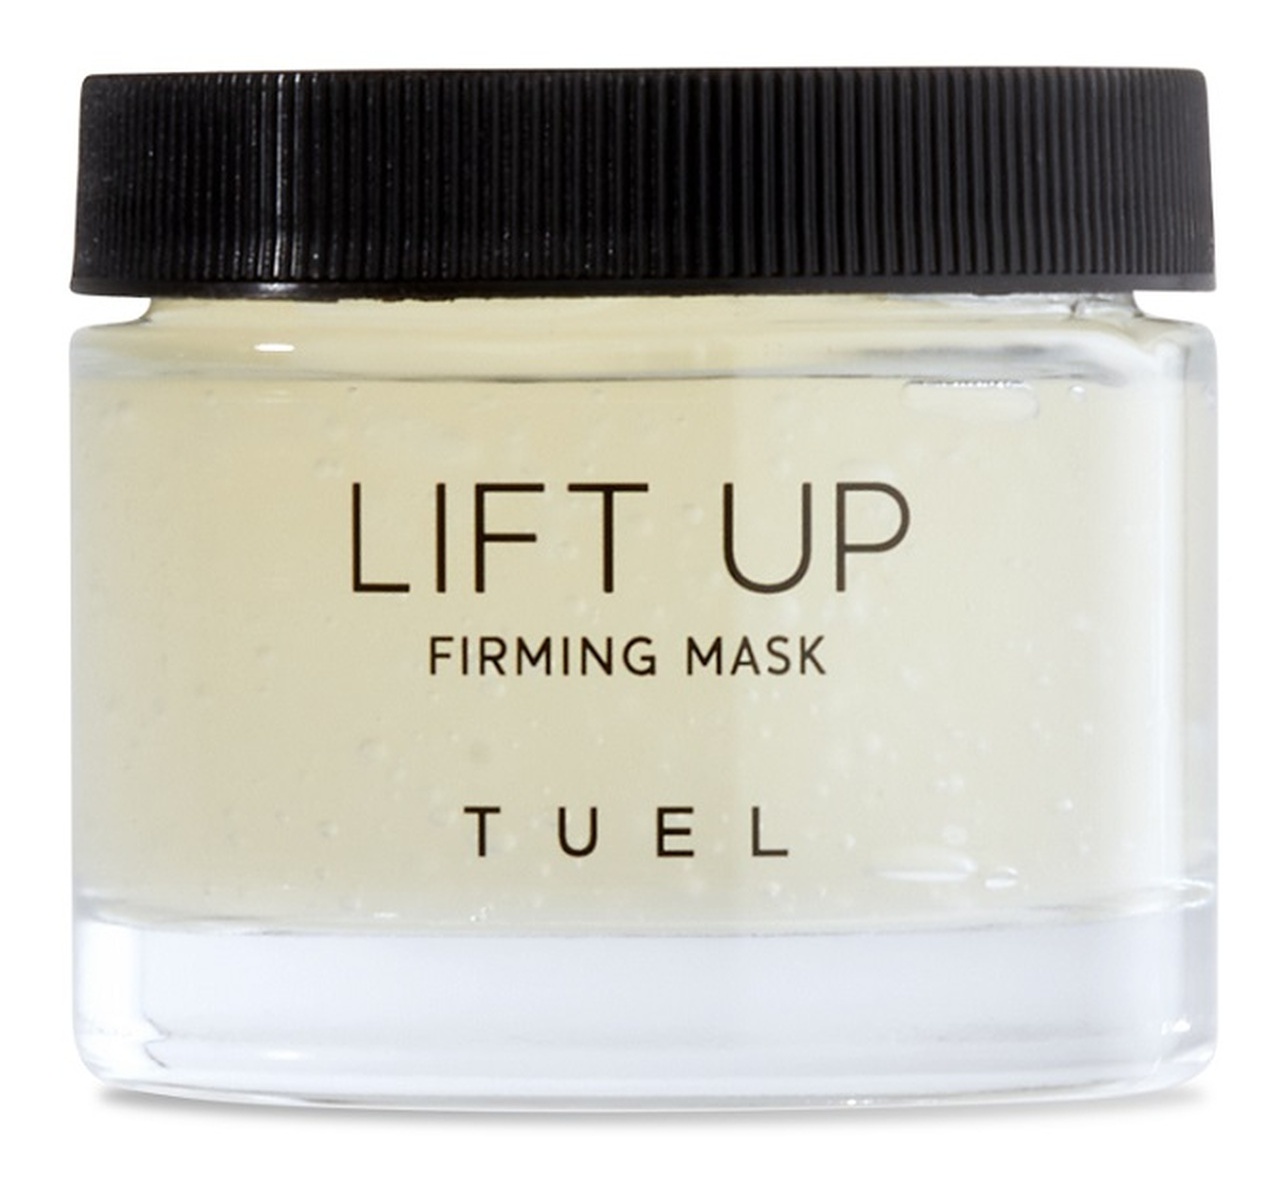 Tuel Lift Up Firming Mask